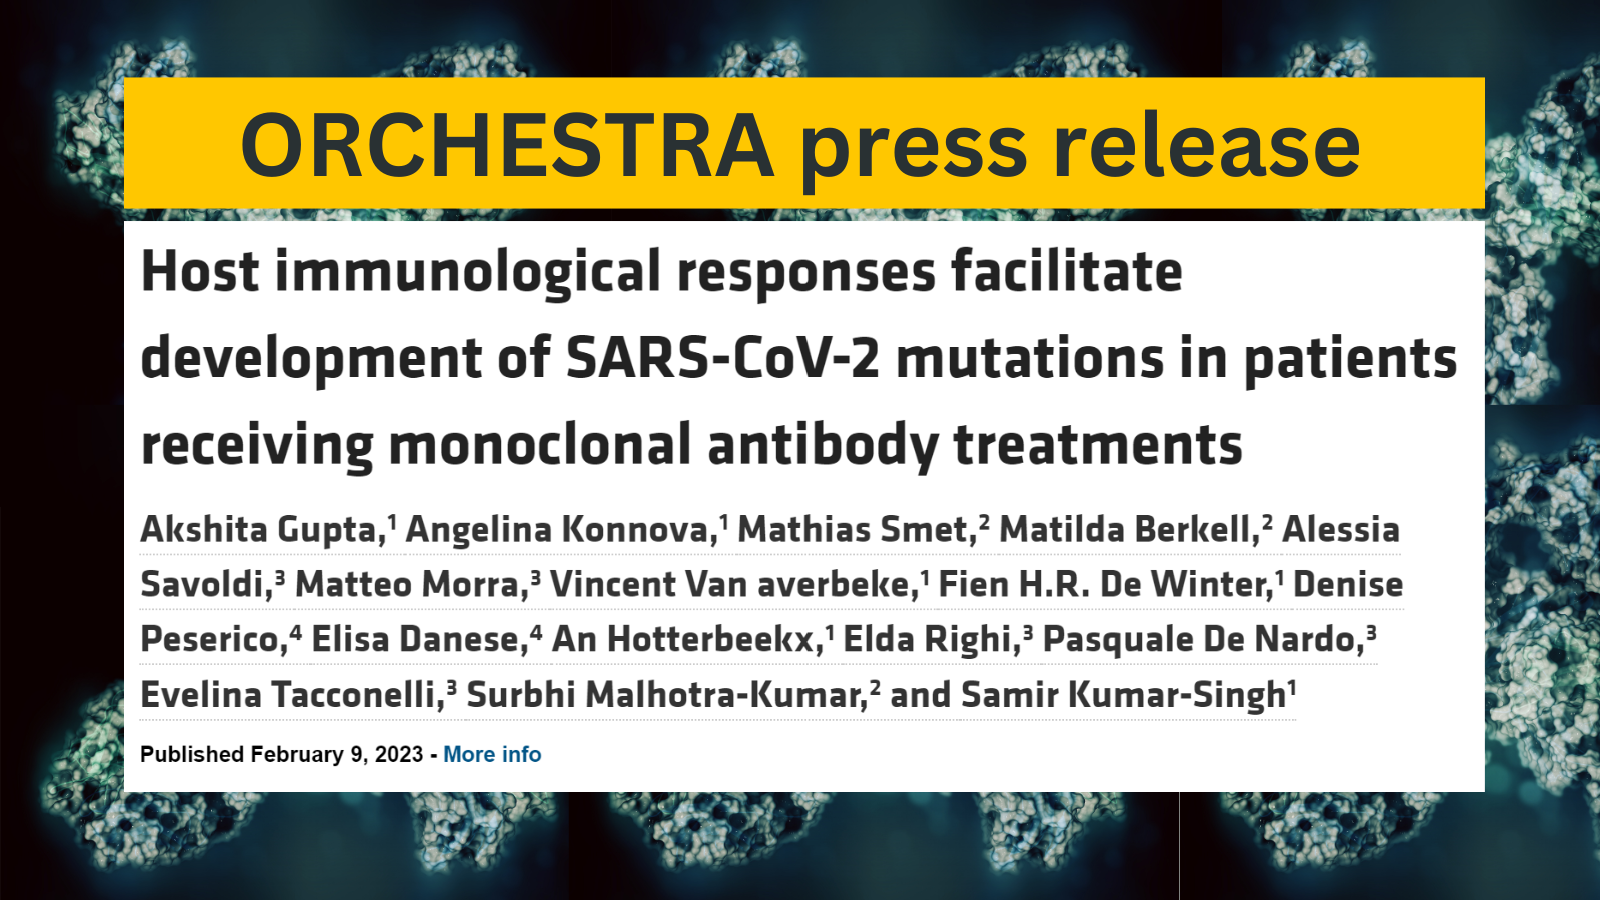 PRESS RELEASE: Treatment with Monoclonal Antibodies can cause SARS-CoV-2 mutations – researchers develop score identifying patients at risk